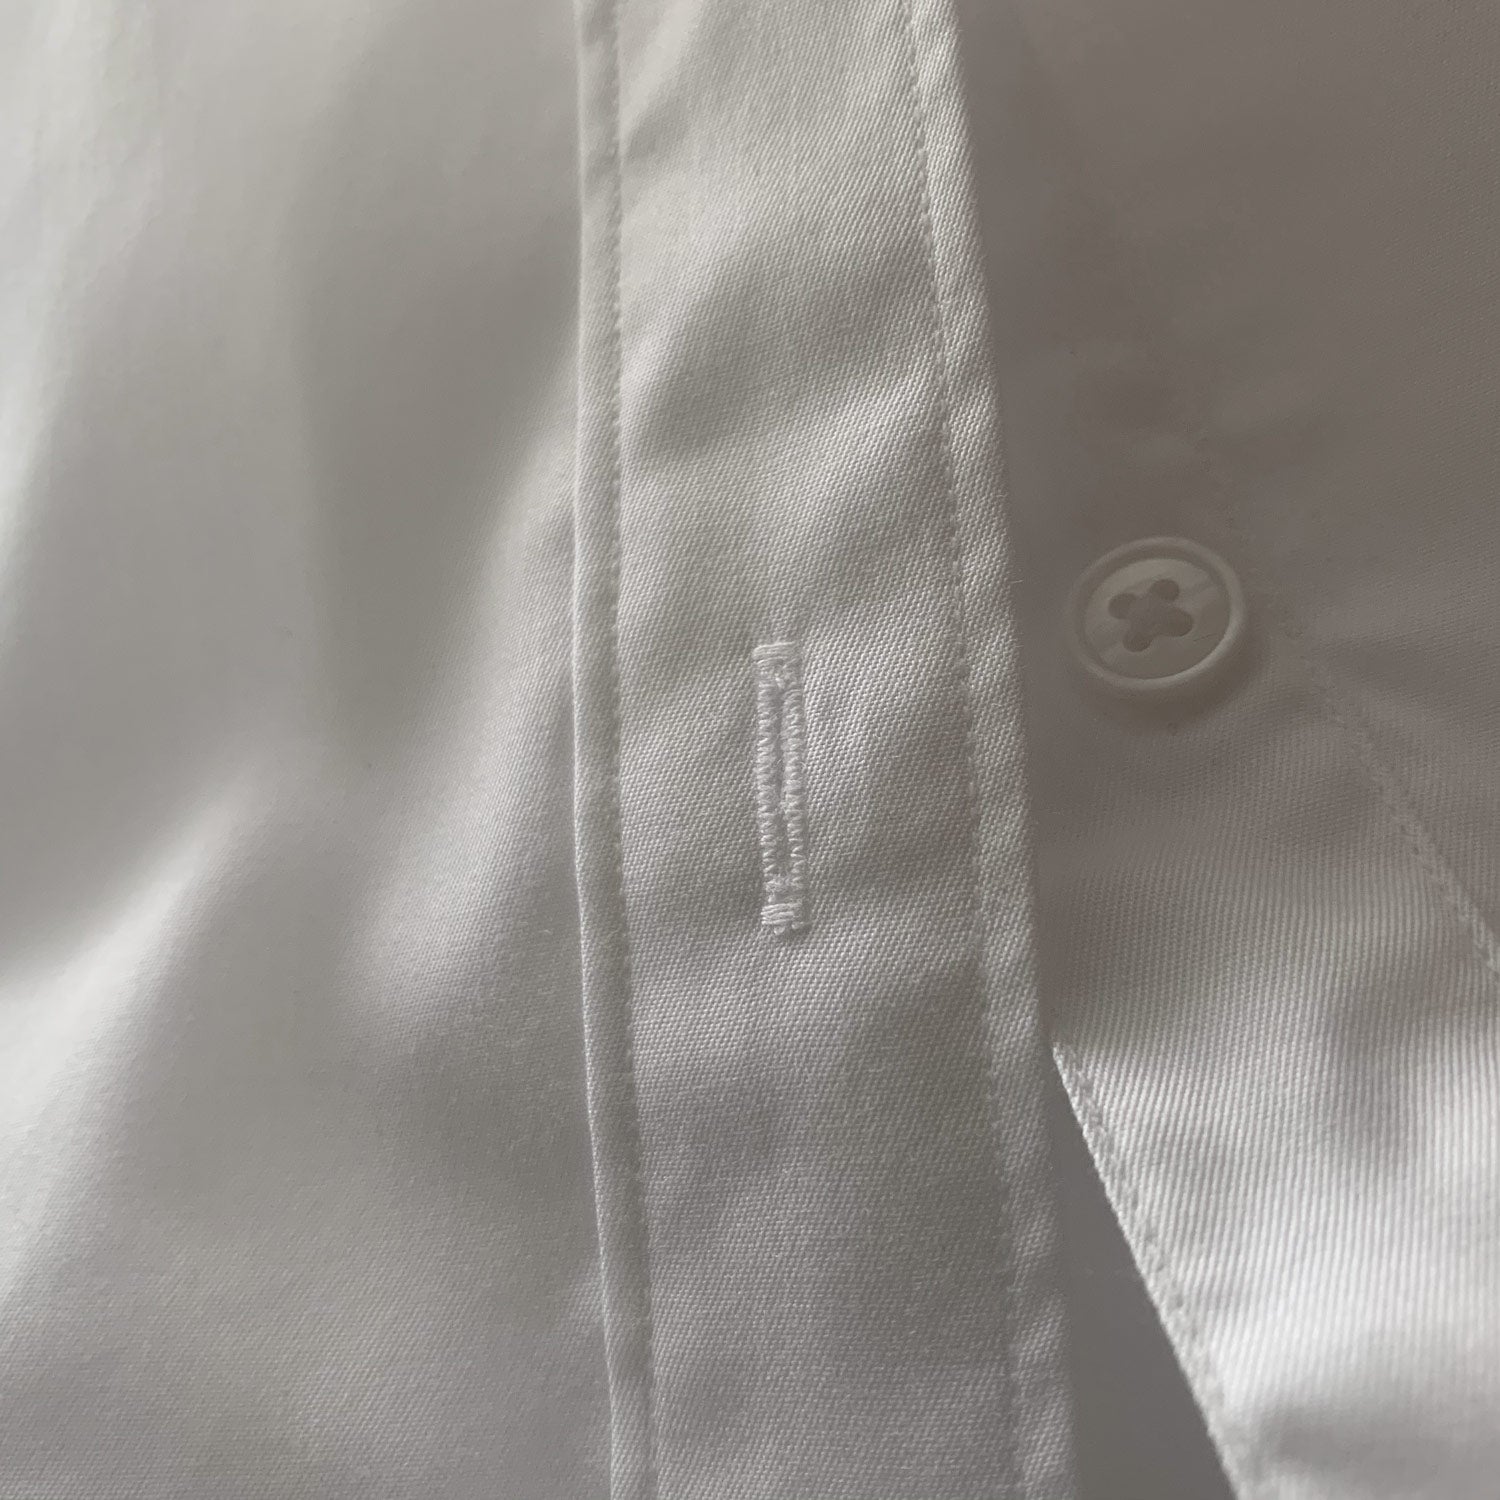 Clean finished button holes on mens shirts image